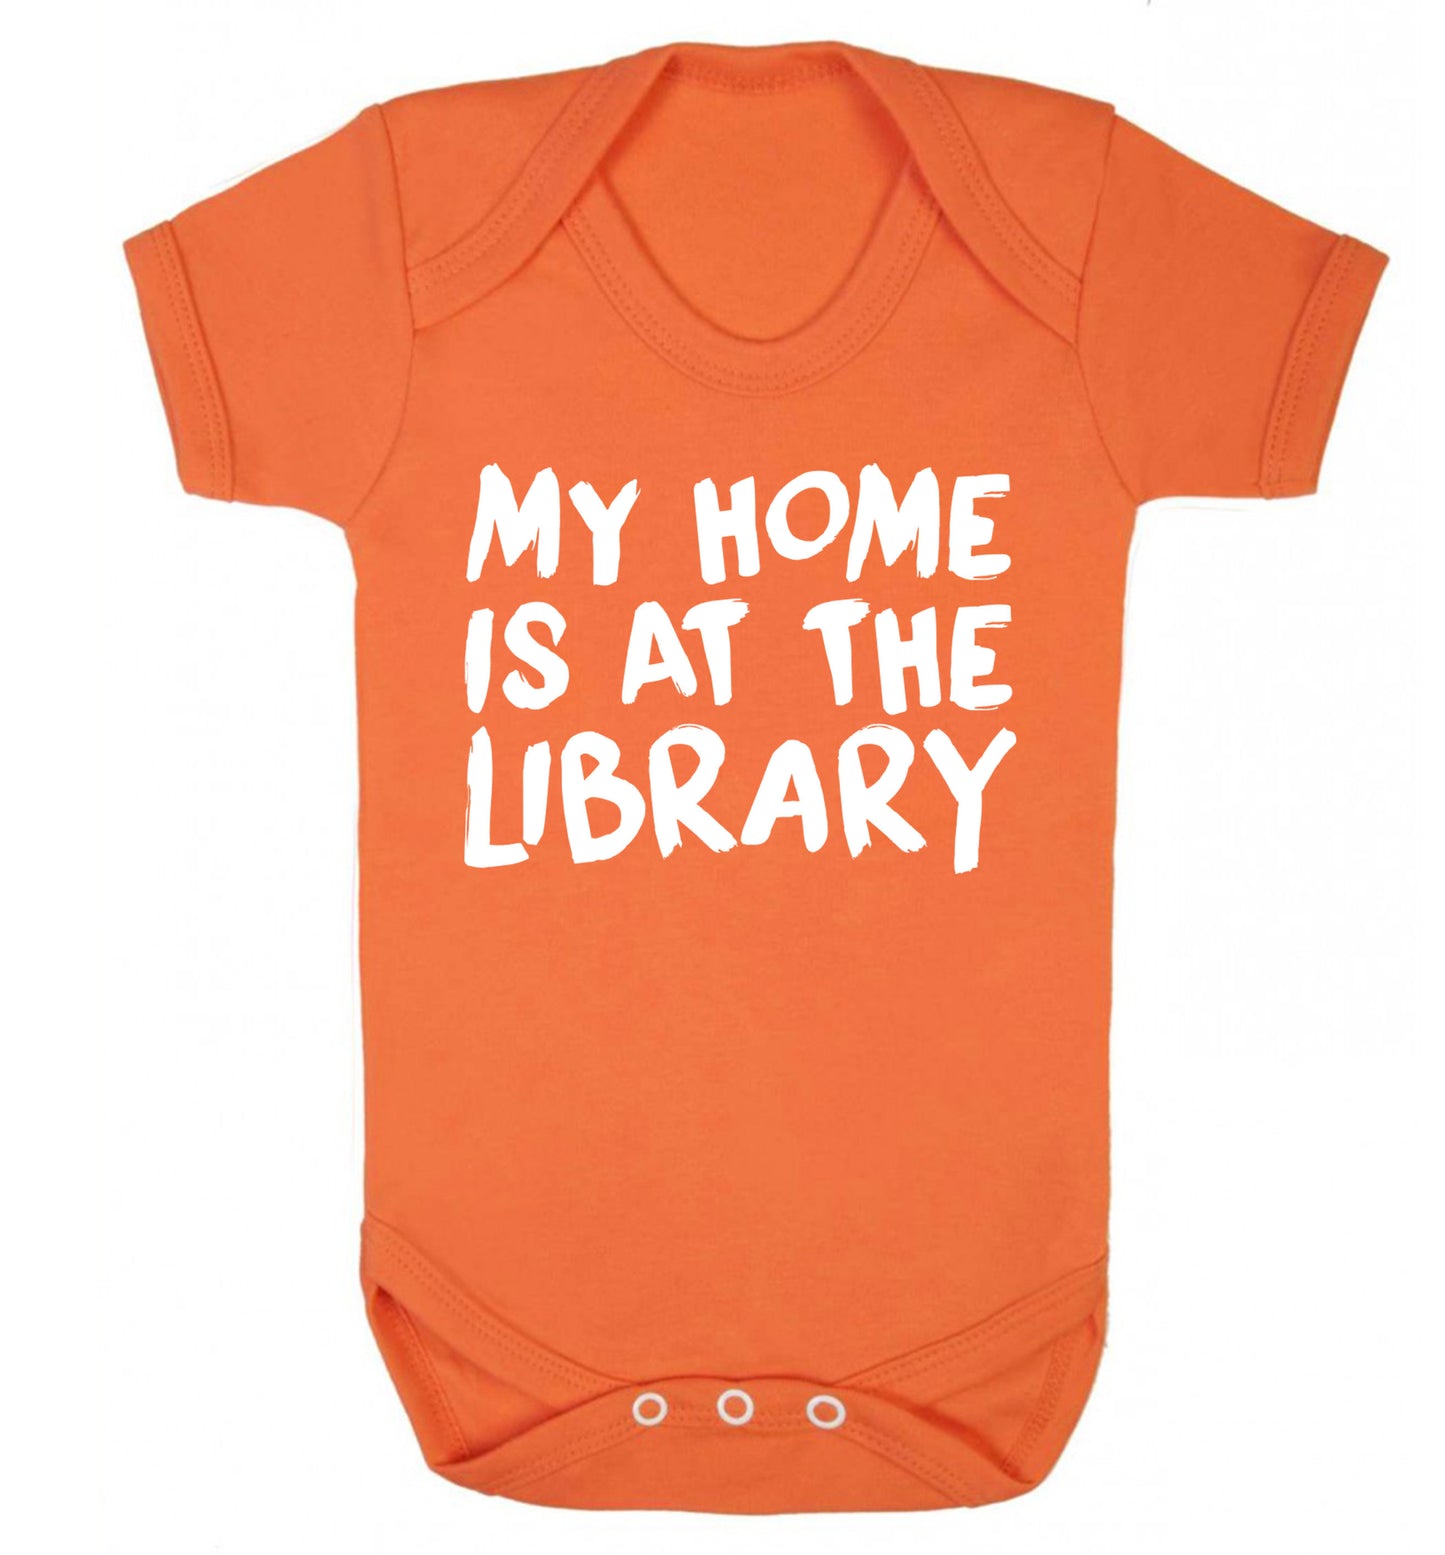 My home is at the library Baby Vest orange 18-24 months